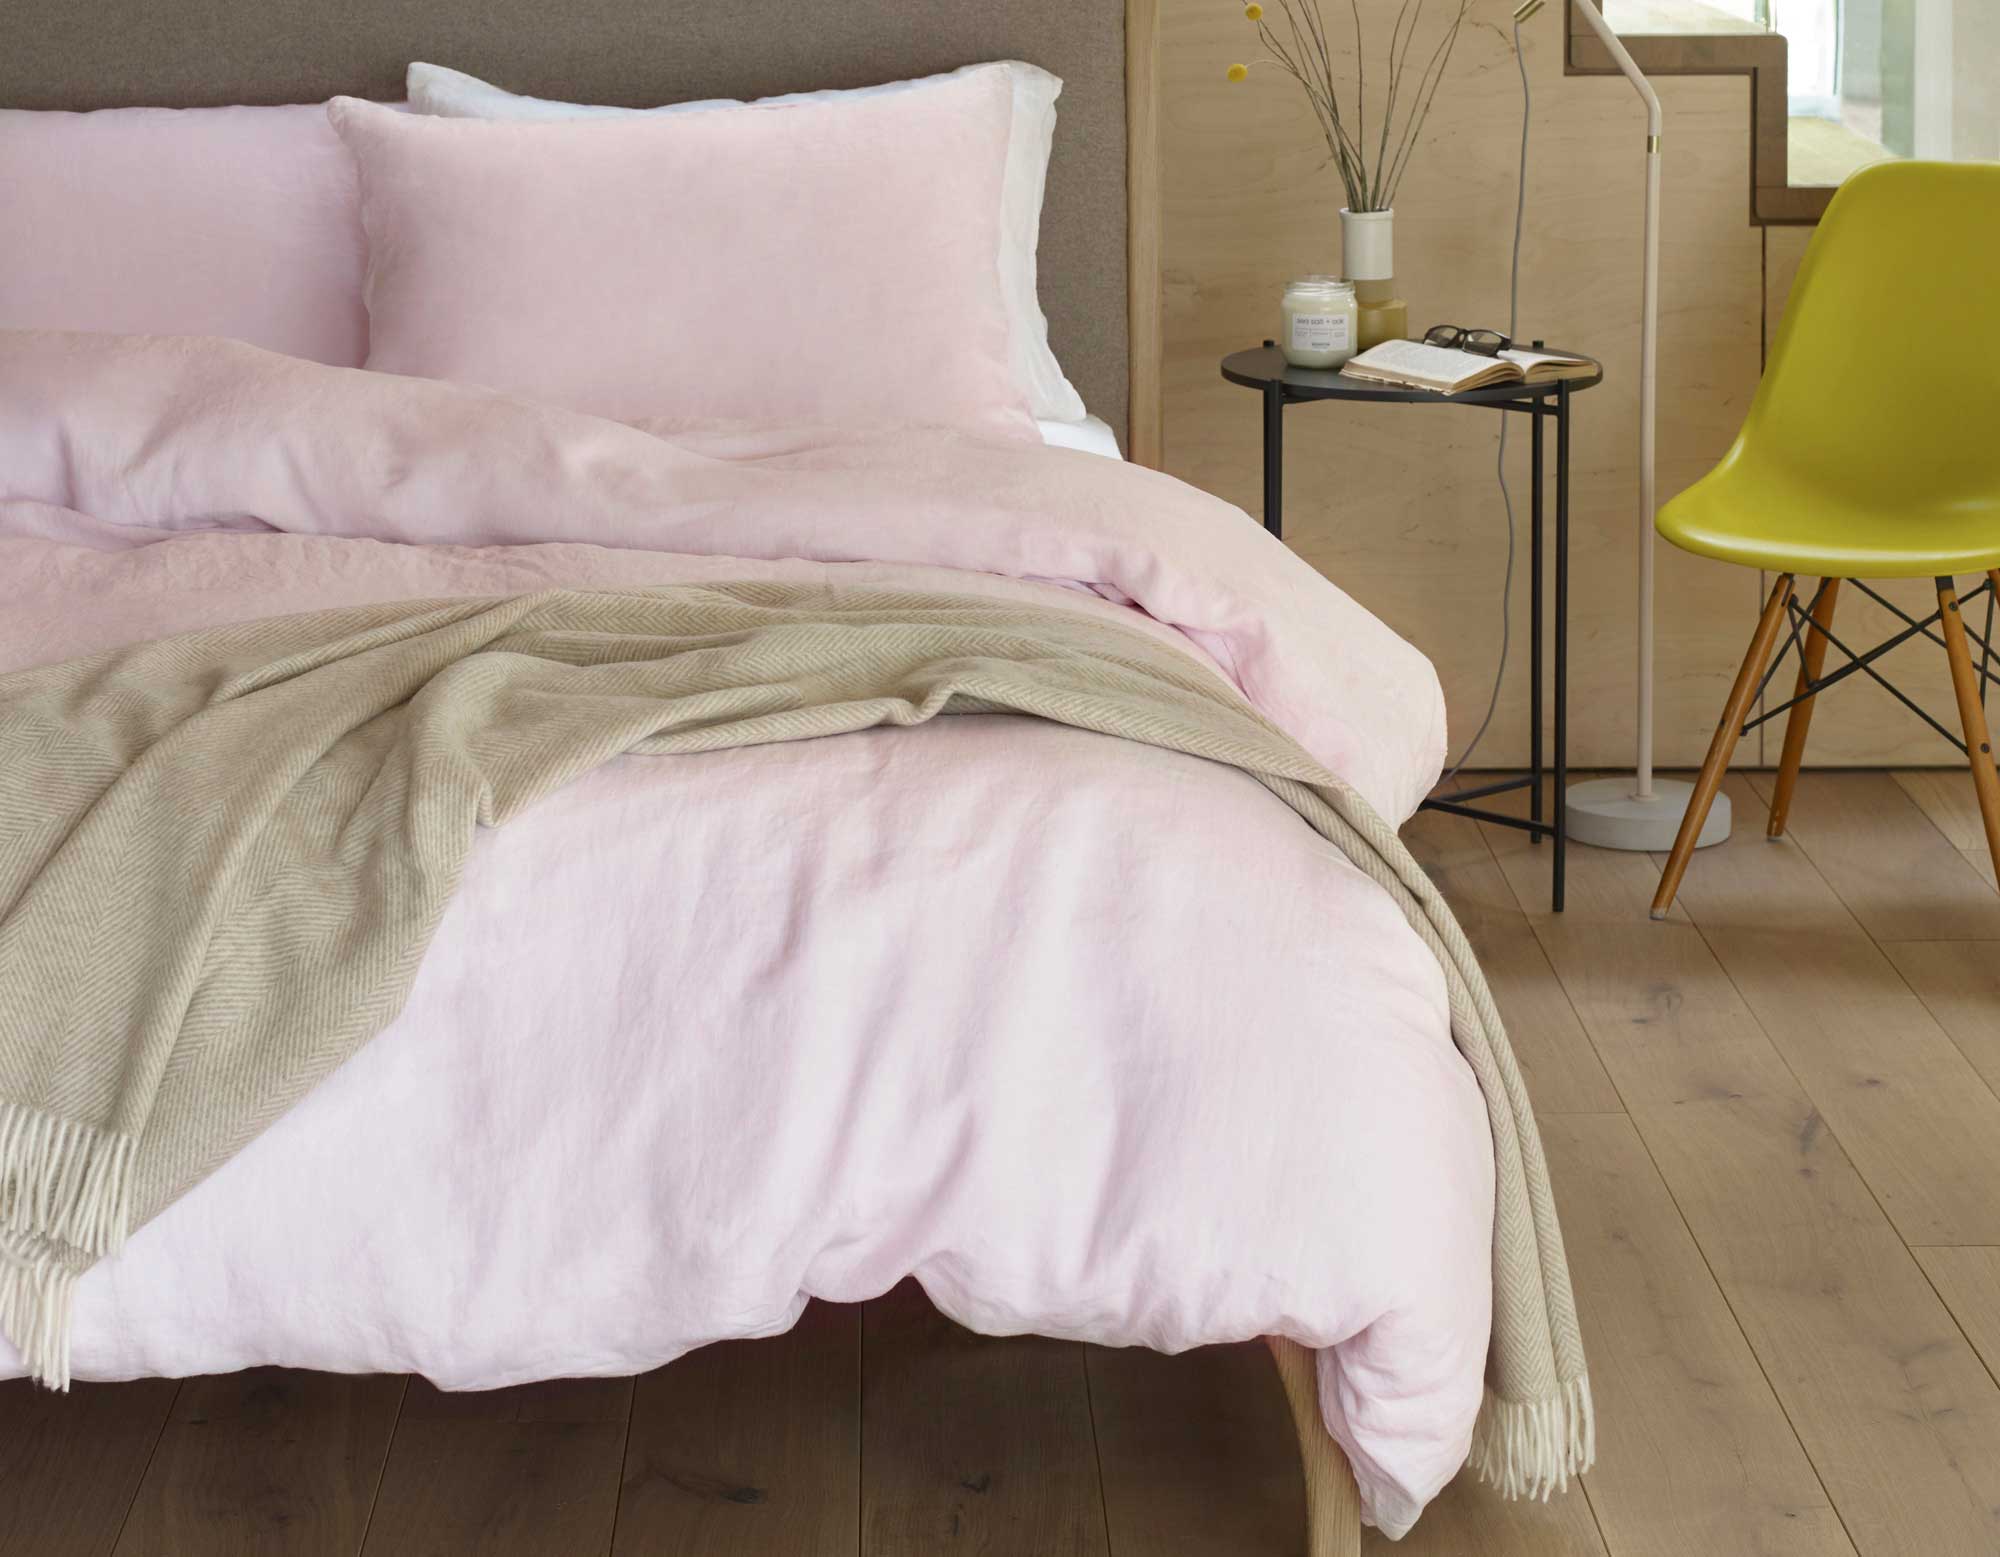 King size pink linen bedding on made bed in contemporary bedroom